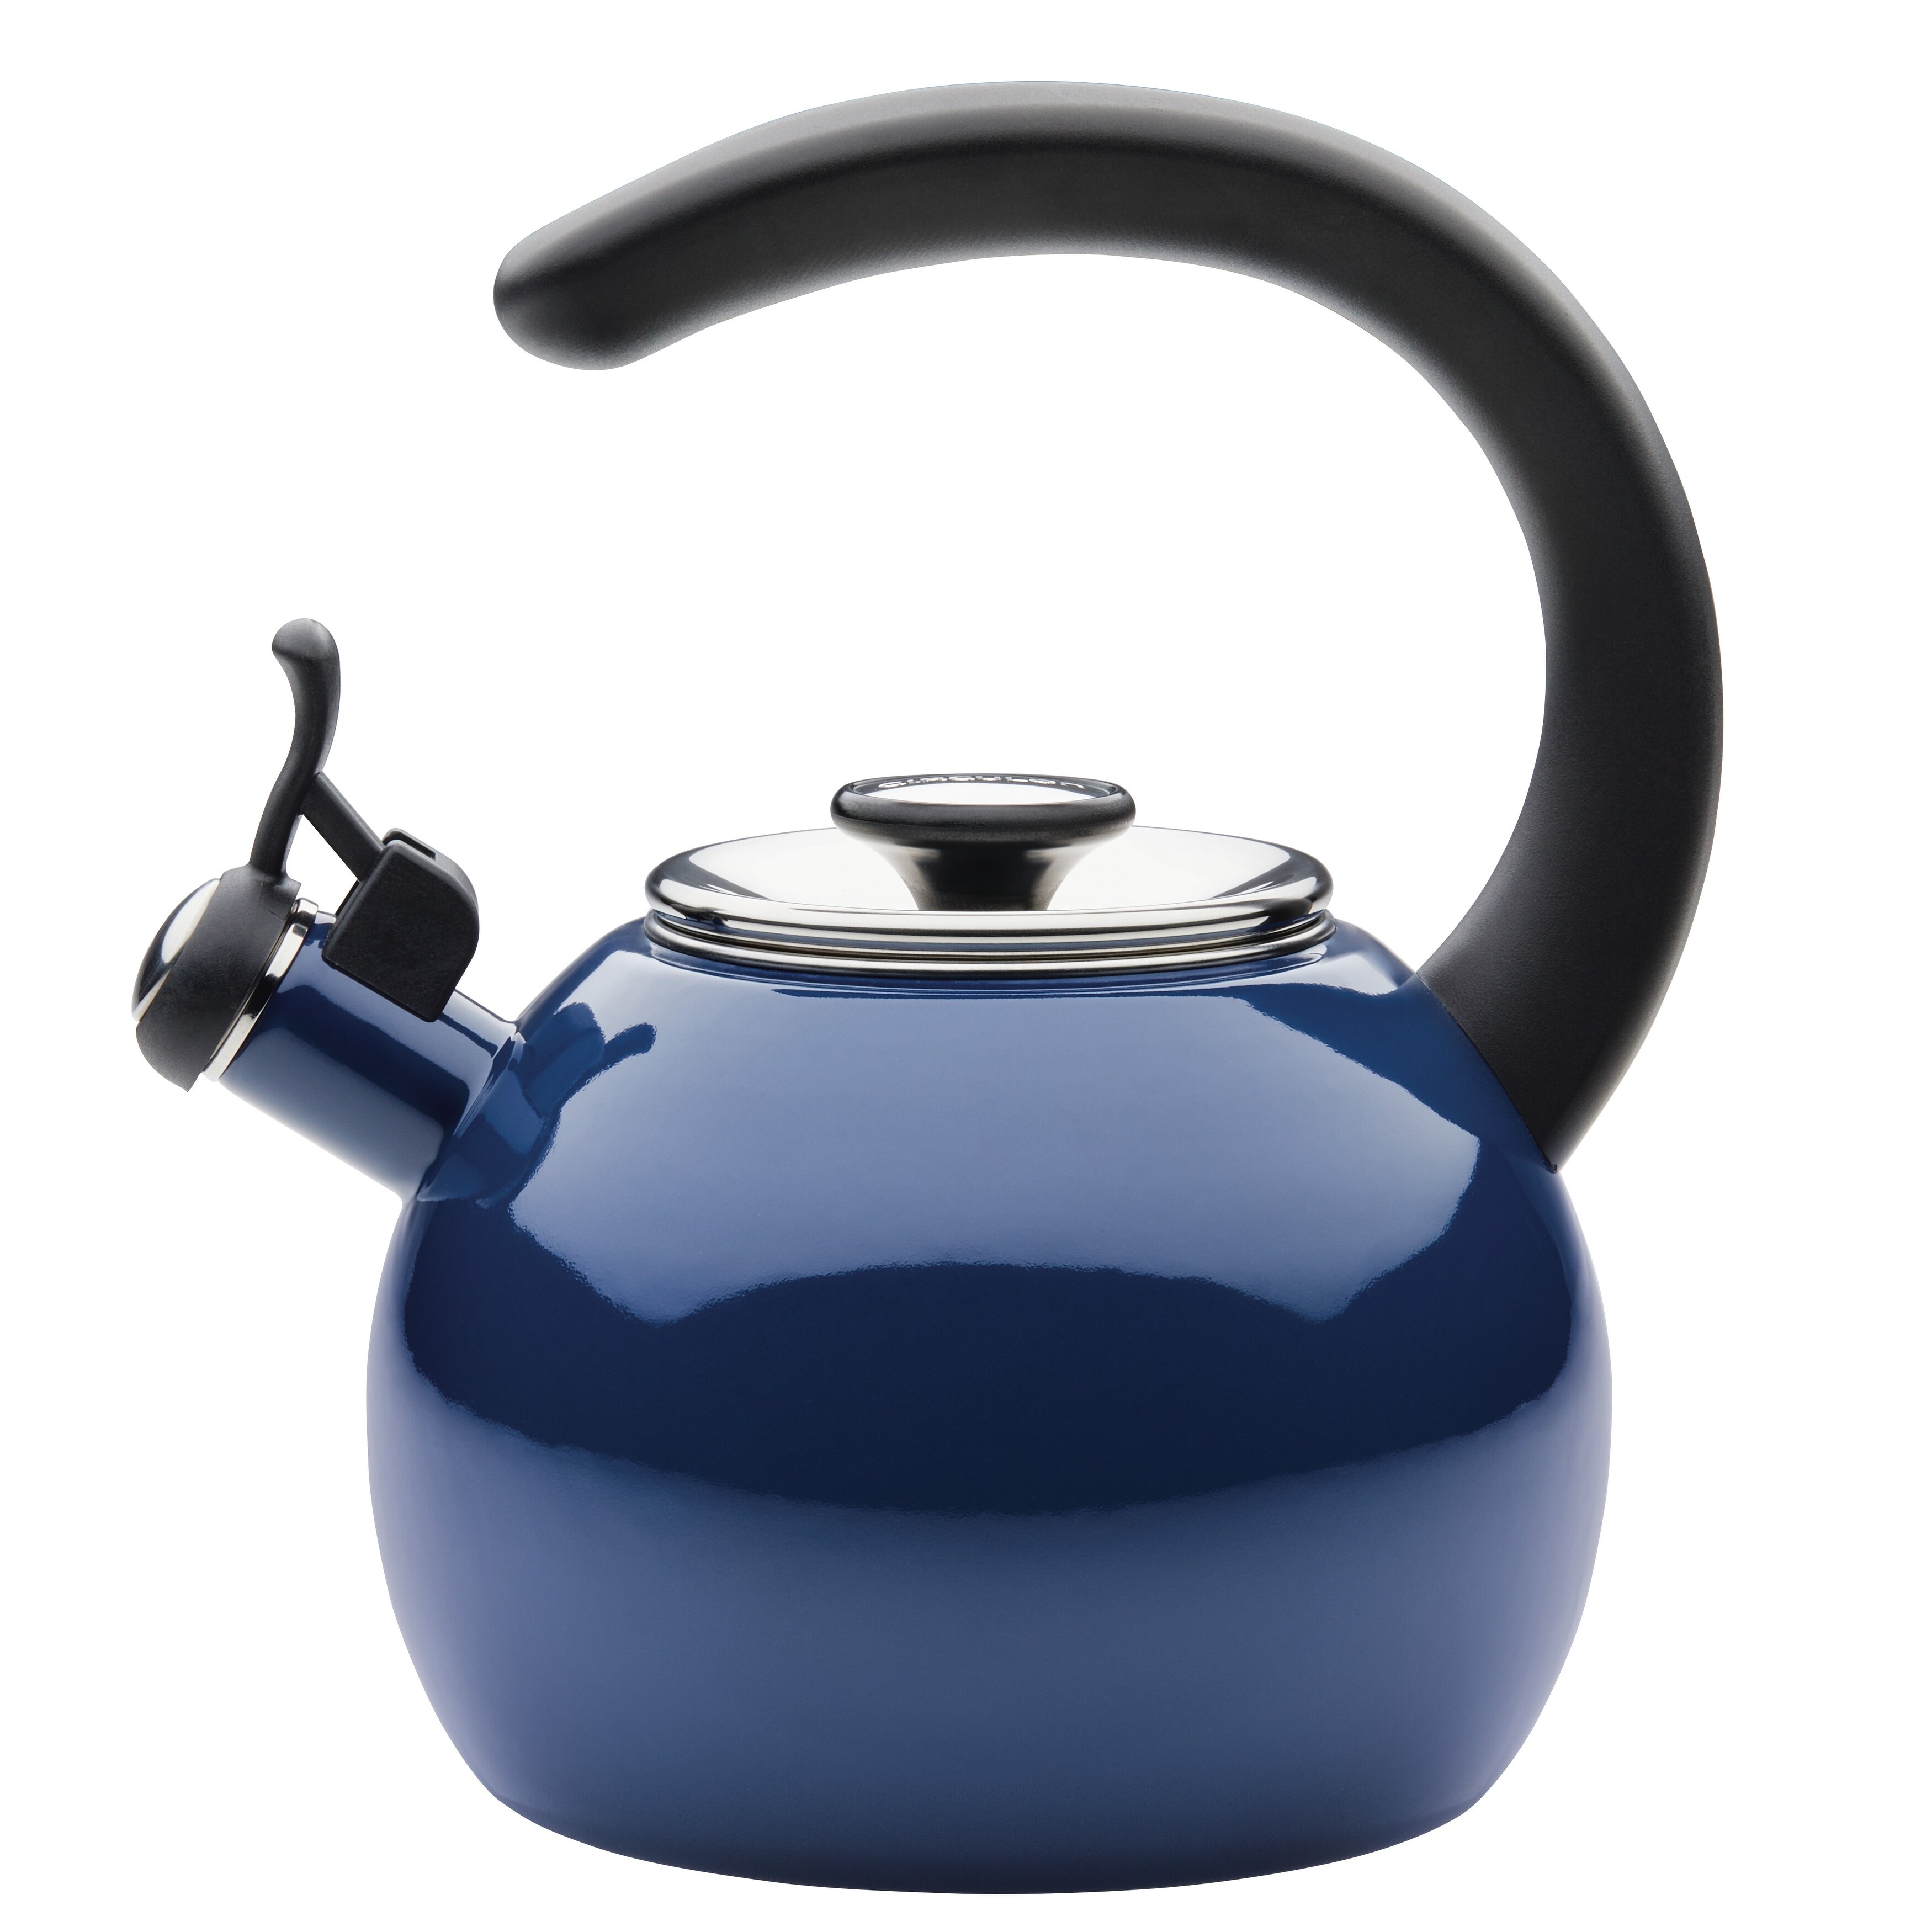 Circulon Enamel on Steel Whistling Induction Teakettle With Flip-Up Spout,  2-Quart, Navy - On Sale - Bed Bath & Beyond - 38250479